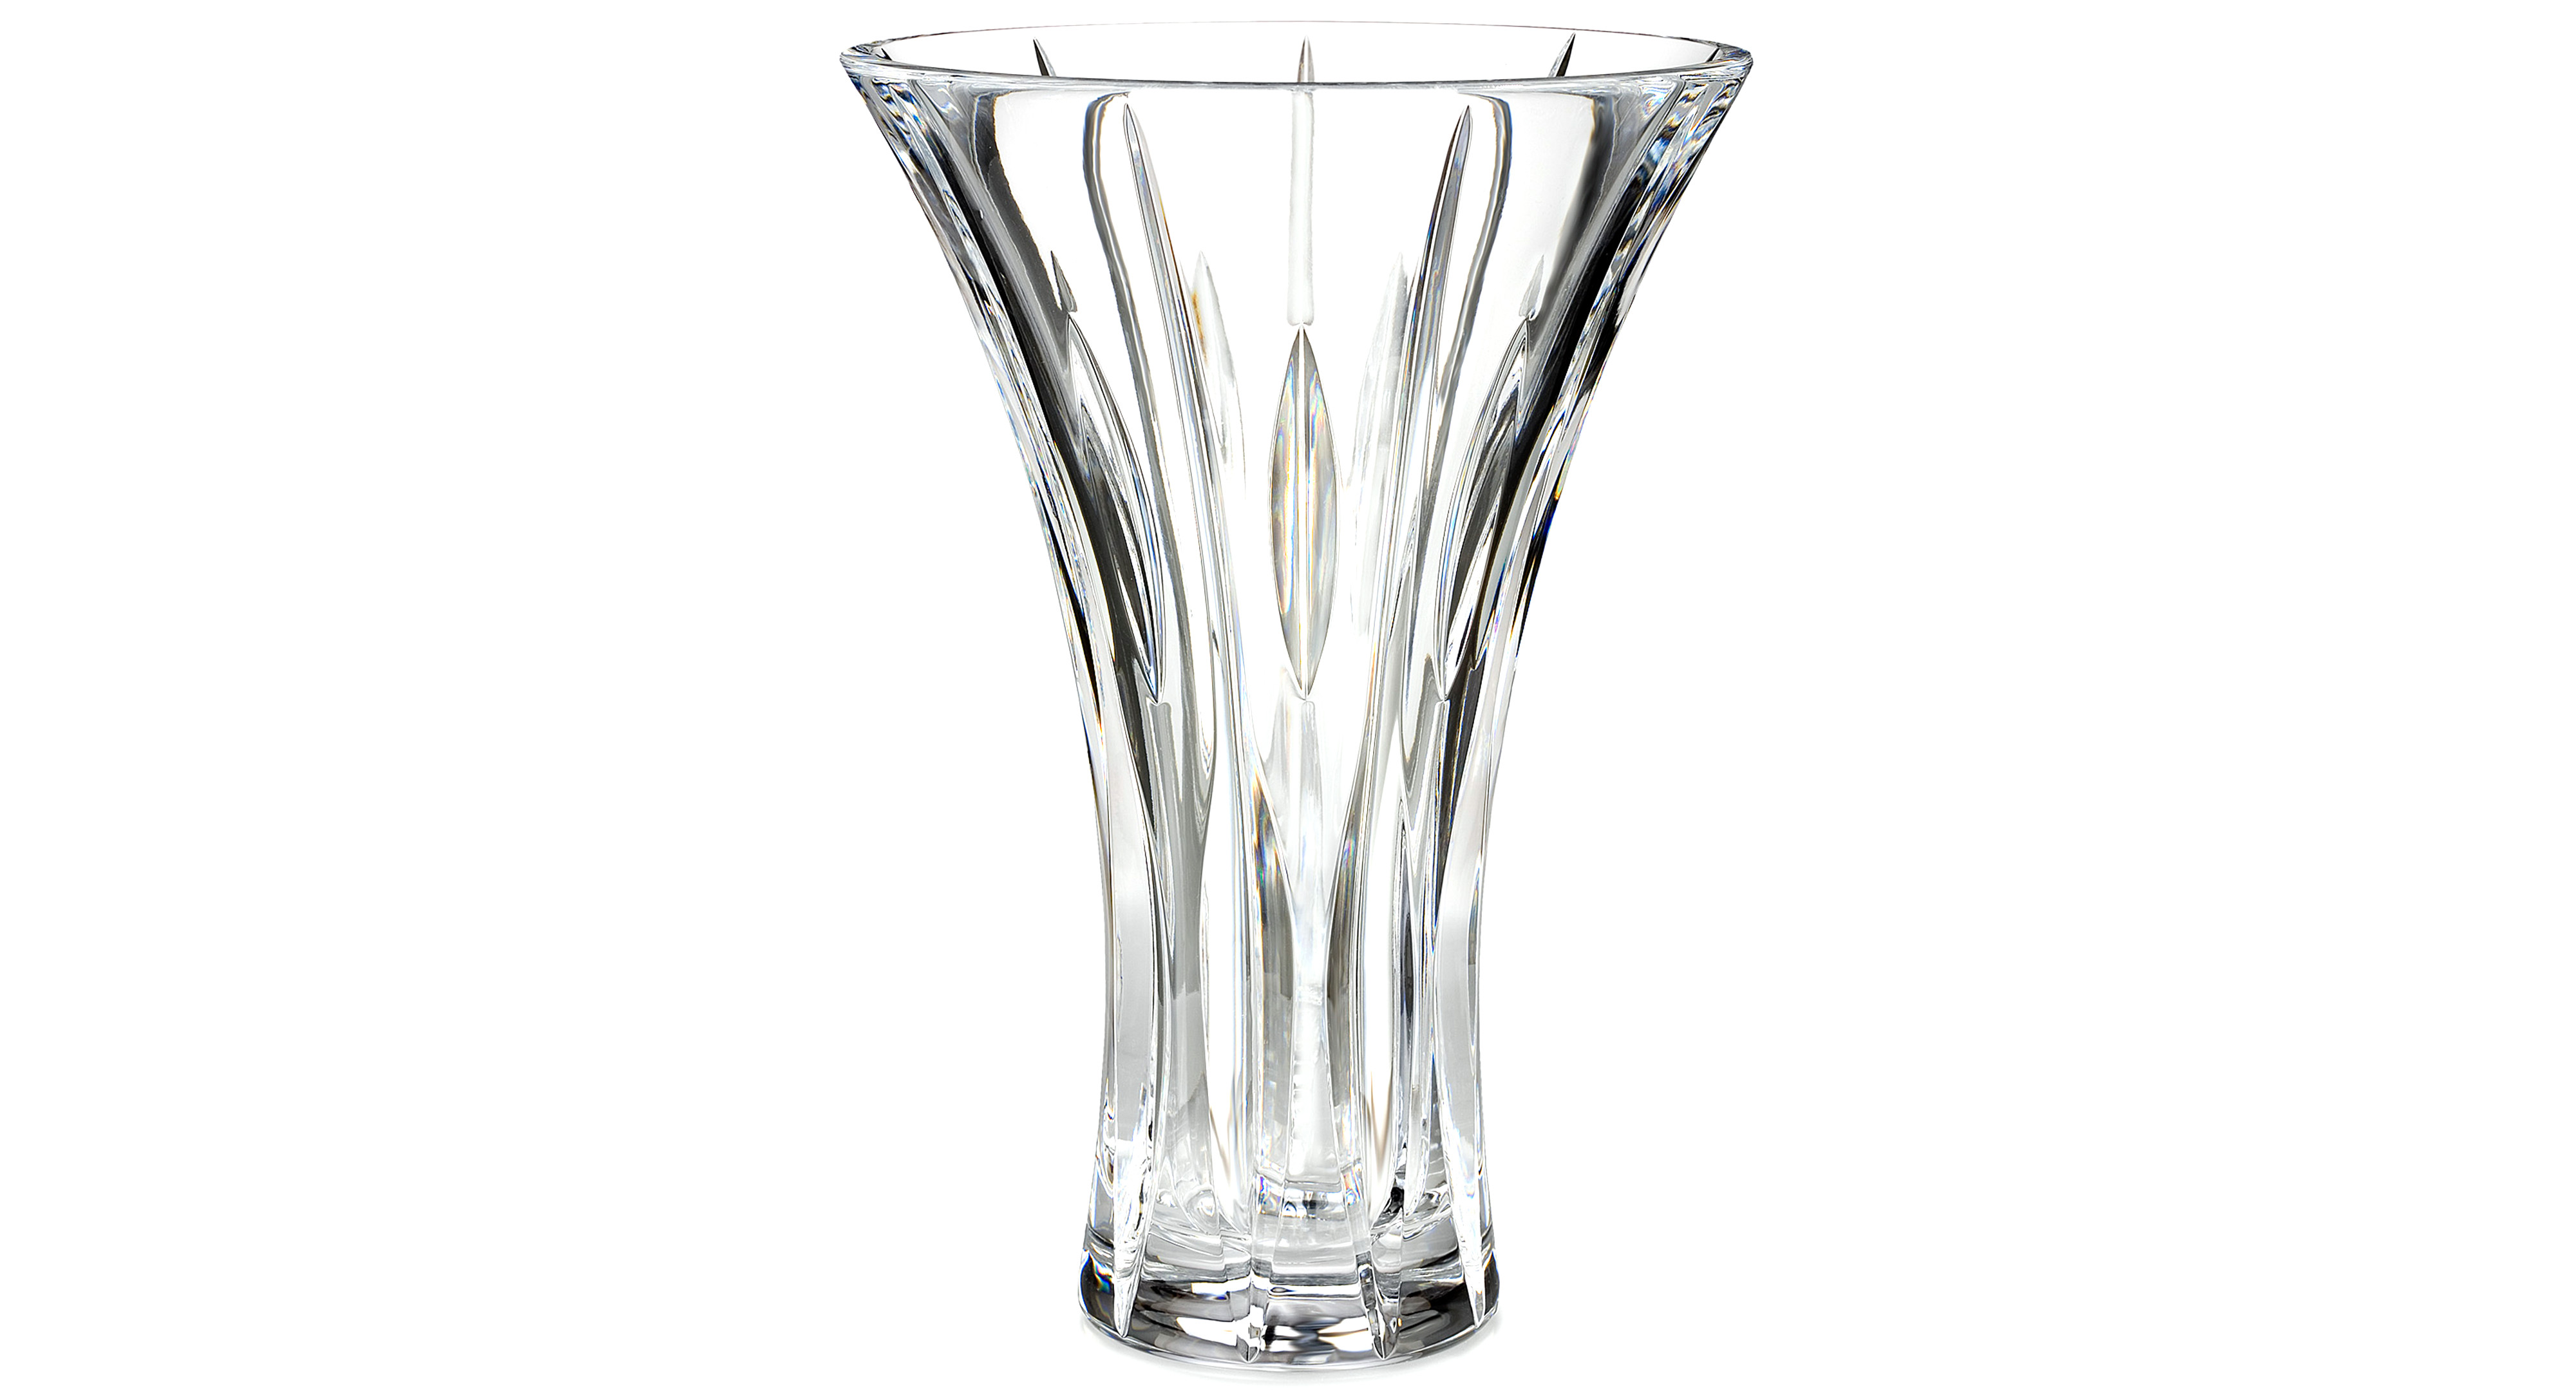 17 Elegant Waterford Crystal Vase 14 Inch 2024 free download waterford crystal vase 14 inch of nachtmann saphir 8 in crystal decorative vase in clear pertaining to marquis by vase 11 sheridan flared